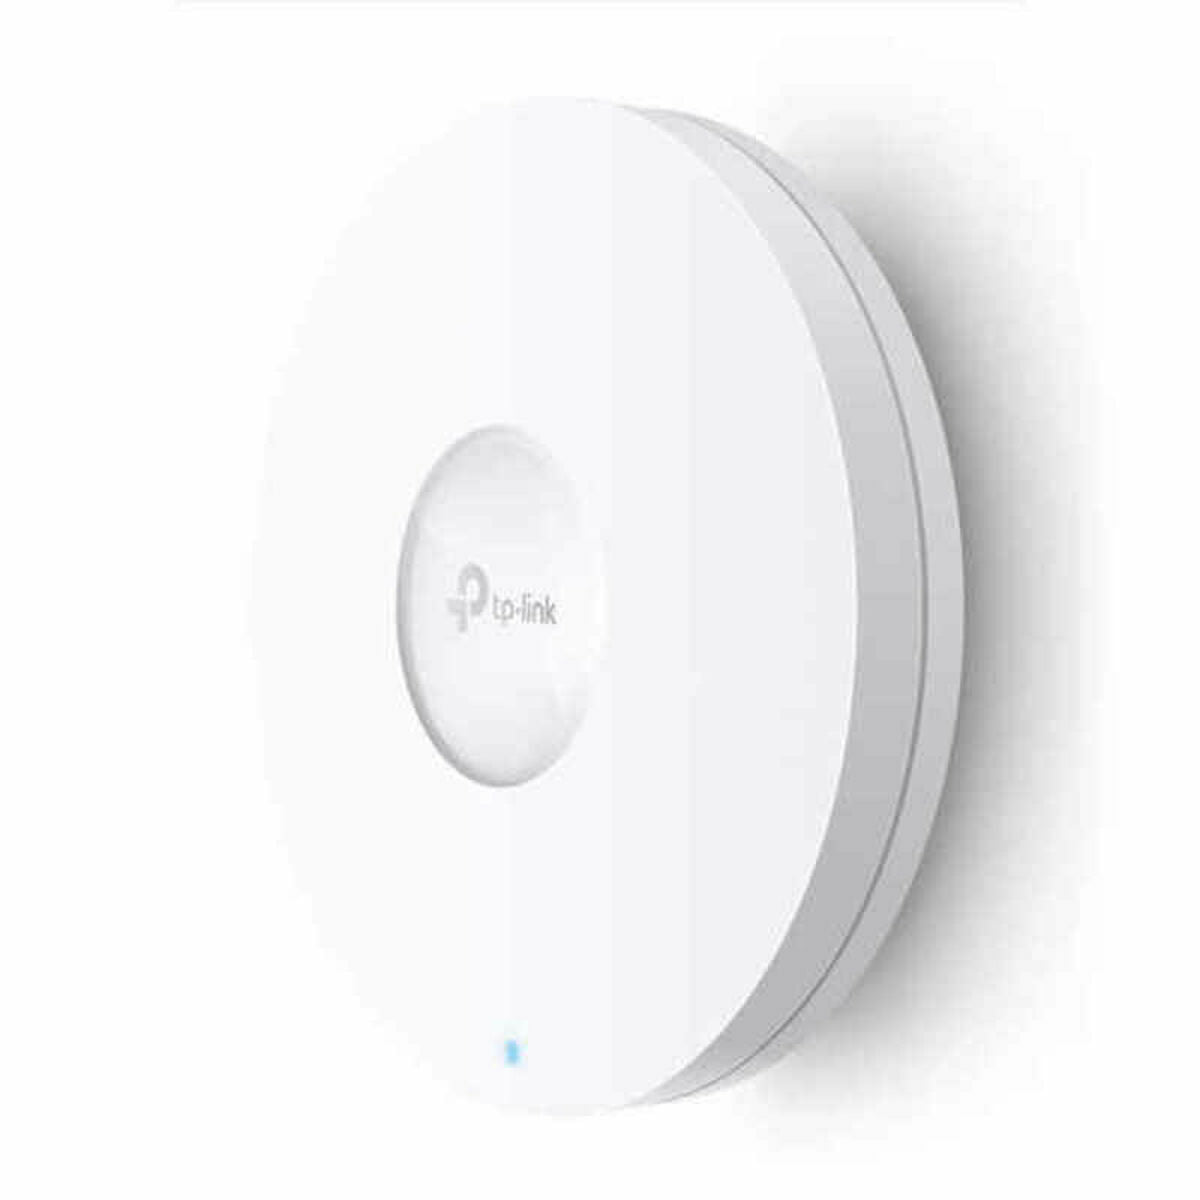 Access point TP-Link EAP620 HD White, TP-Link, Computing, Network devices, access-point-tp-link-eap620-hd-white-2, Brand_TP-Link, category-reference-2609, category-reference-2803, category-reference-2820, category-reference-t-19685, category-reference-t-19914, category-reference-t-21369, Condition_NEW, networks/wiring, Price_100 - 200, Teleworking, RiotNook